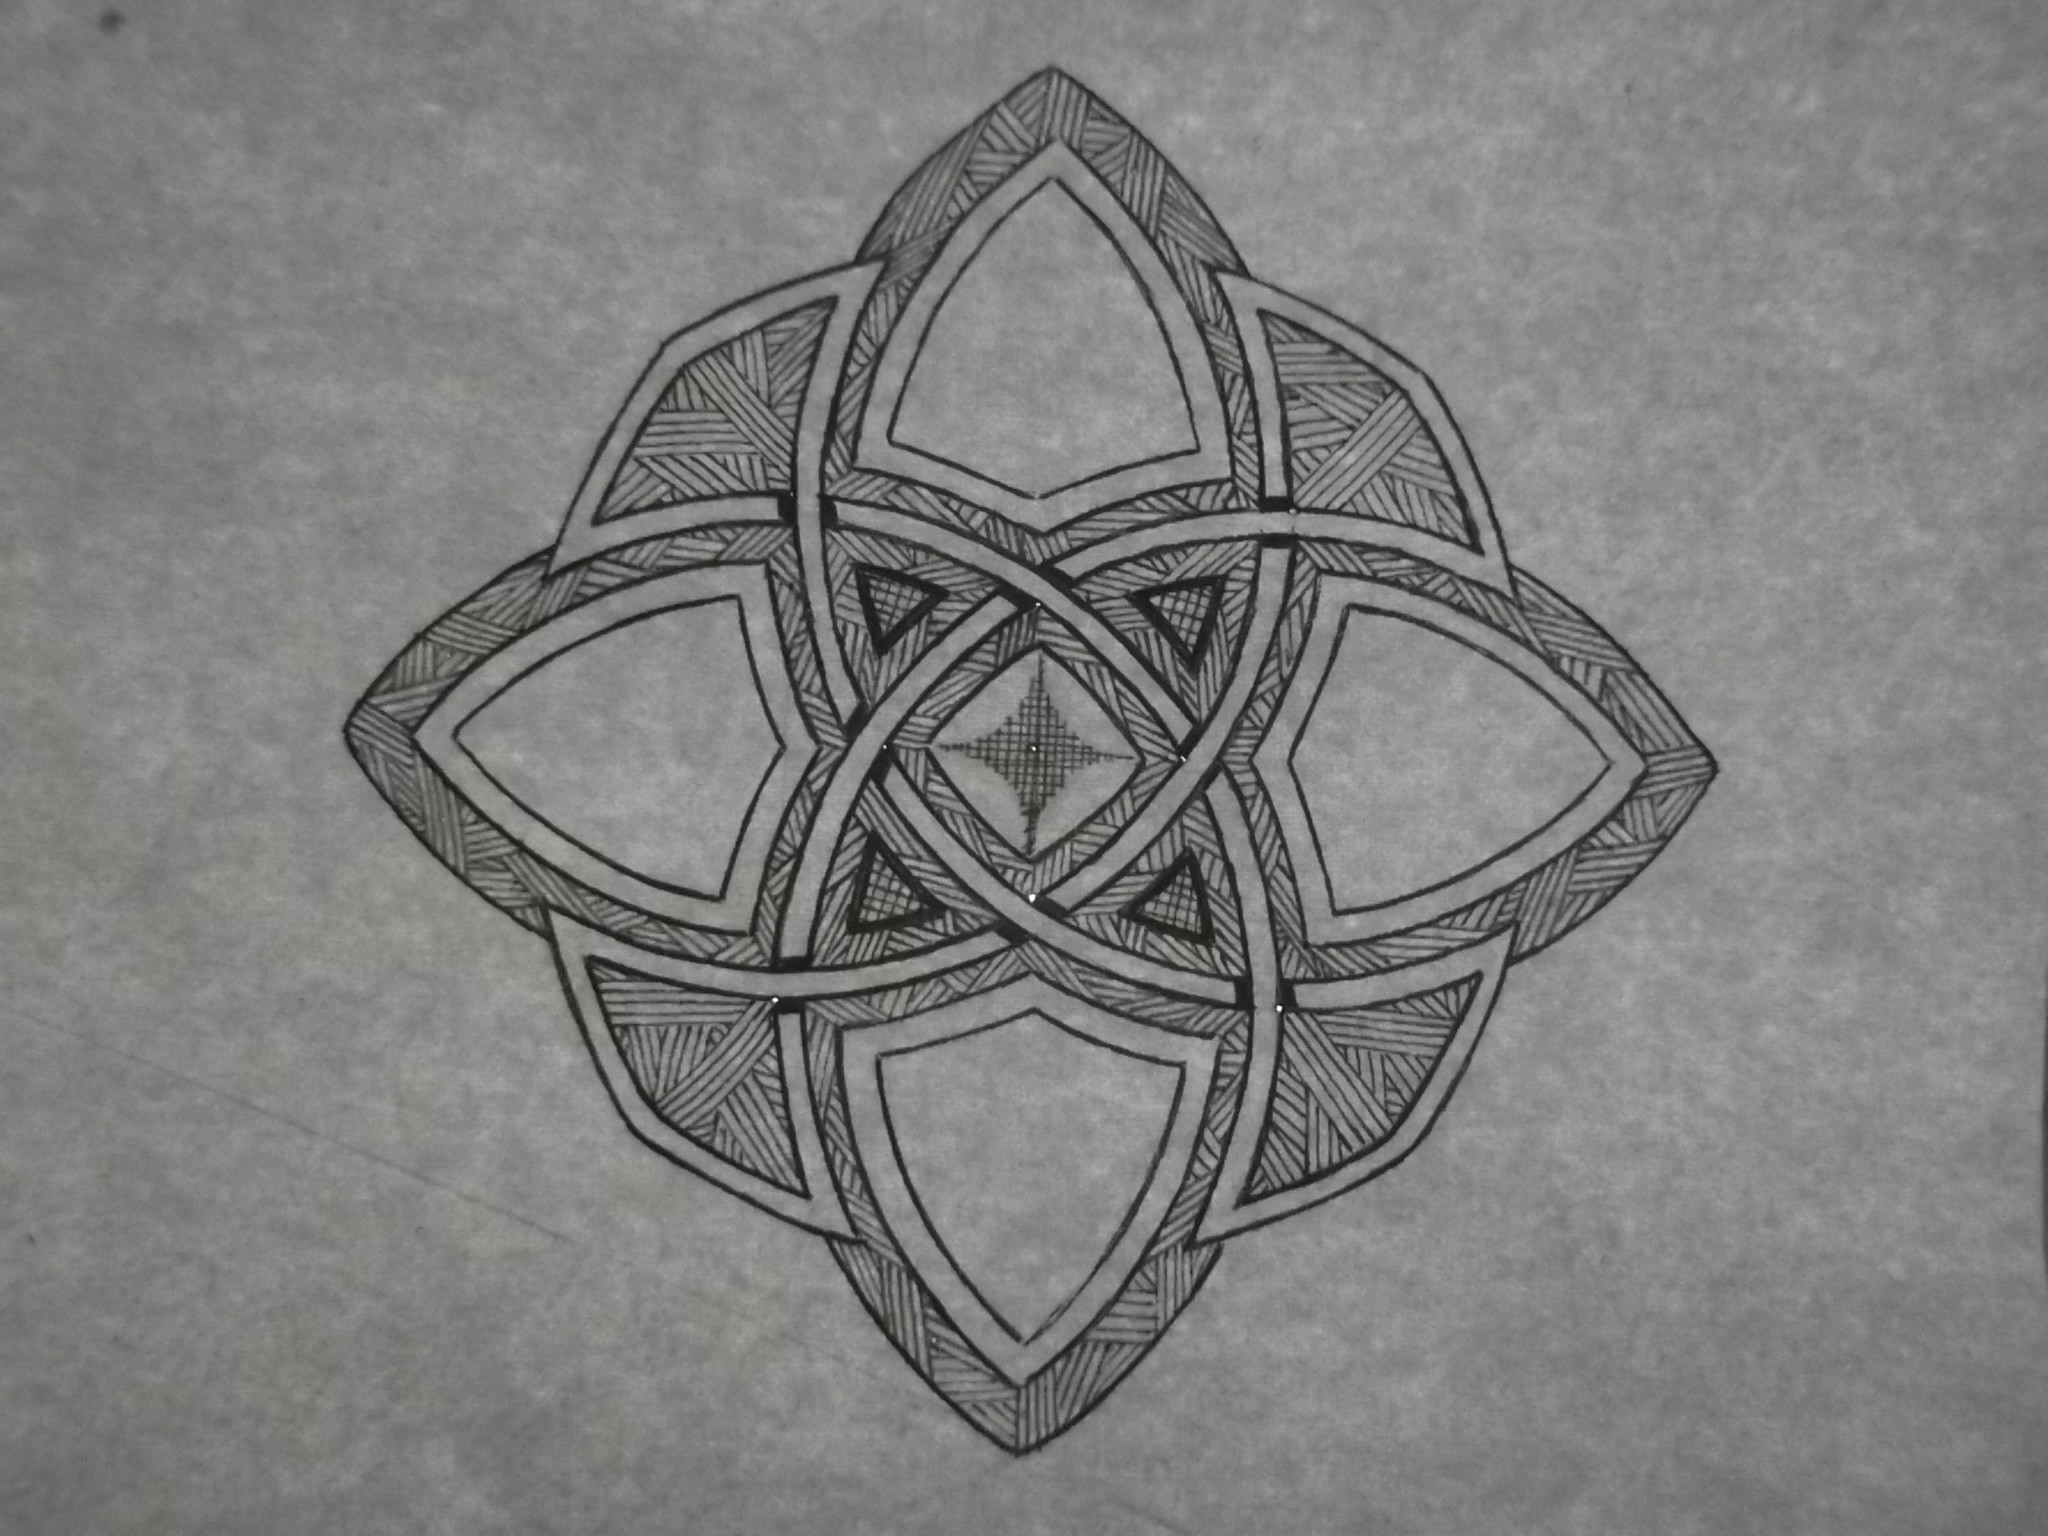 2048x1536 ... Day 74 - Solid Celtic knot crest by AmaterSensei